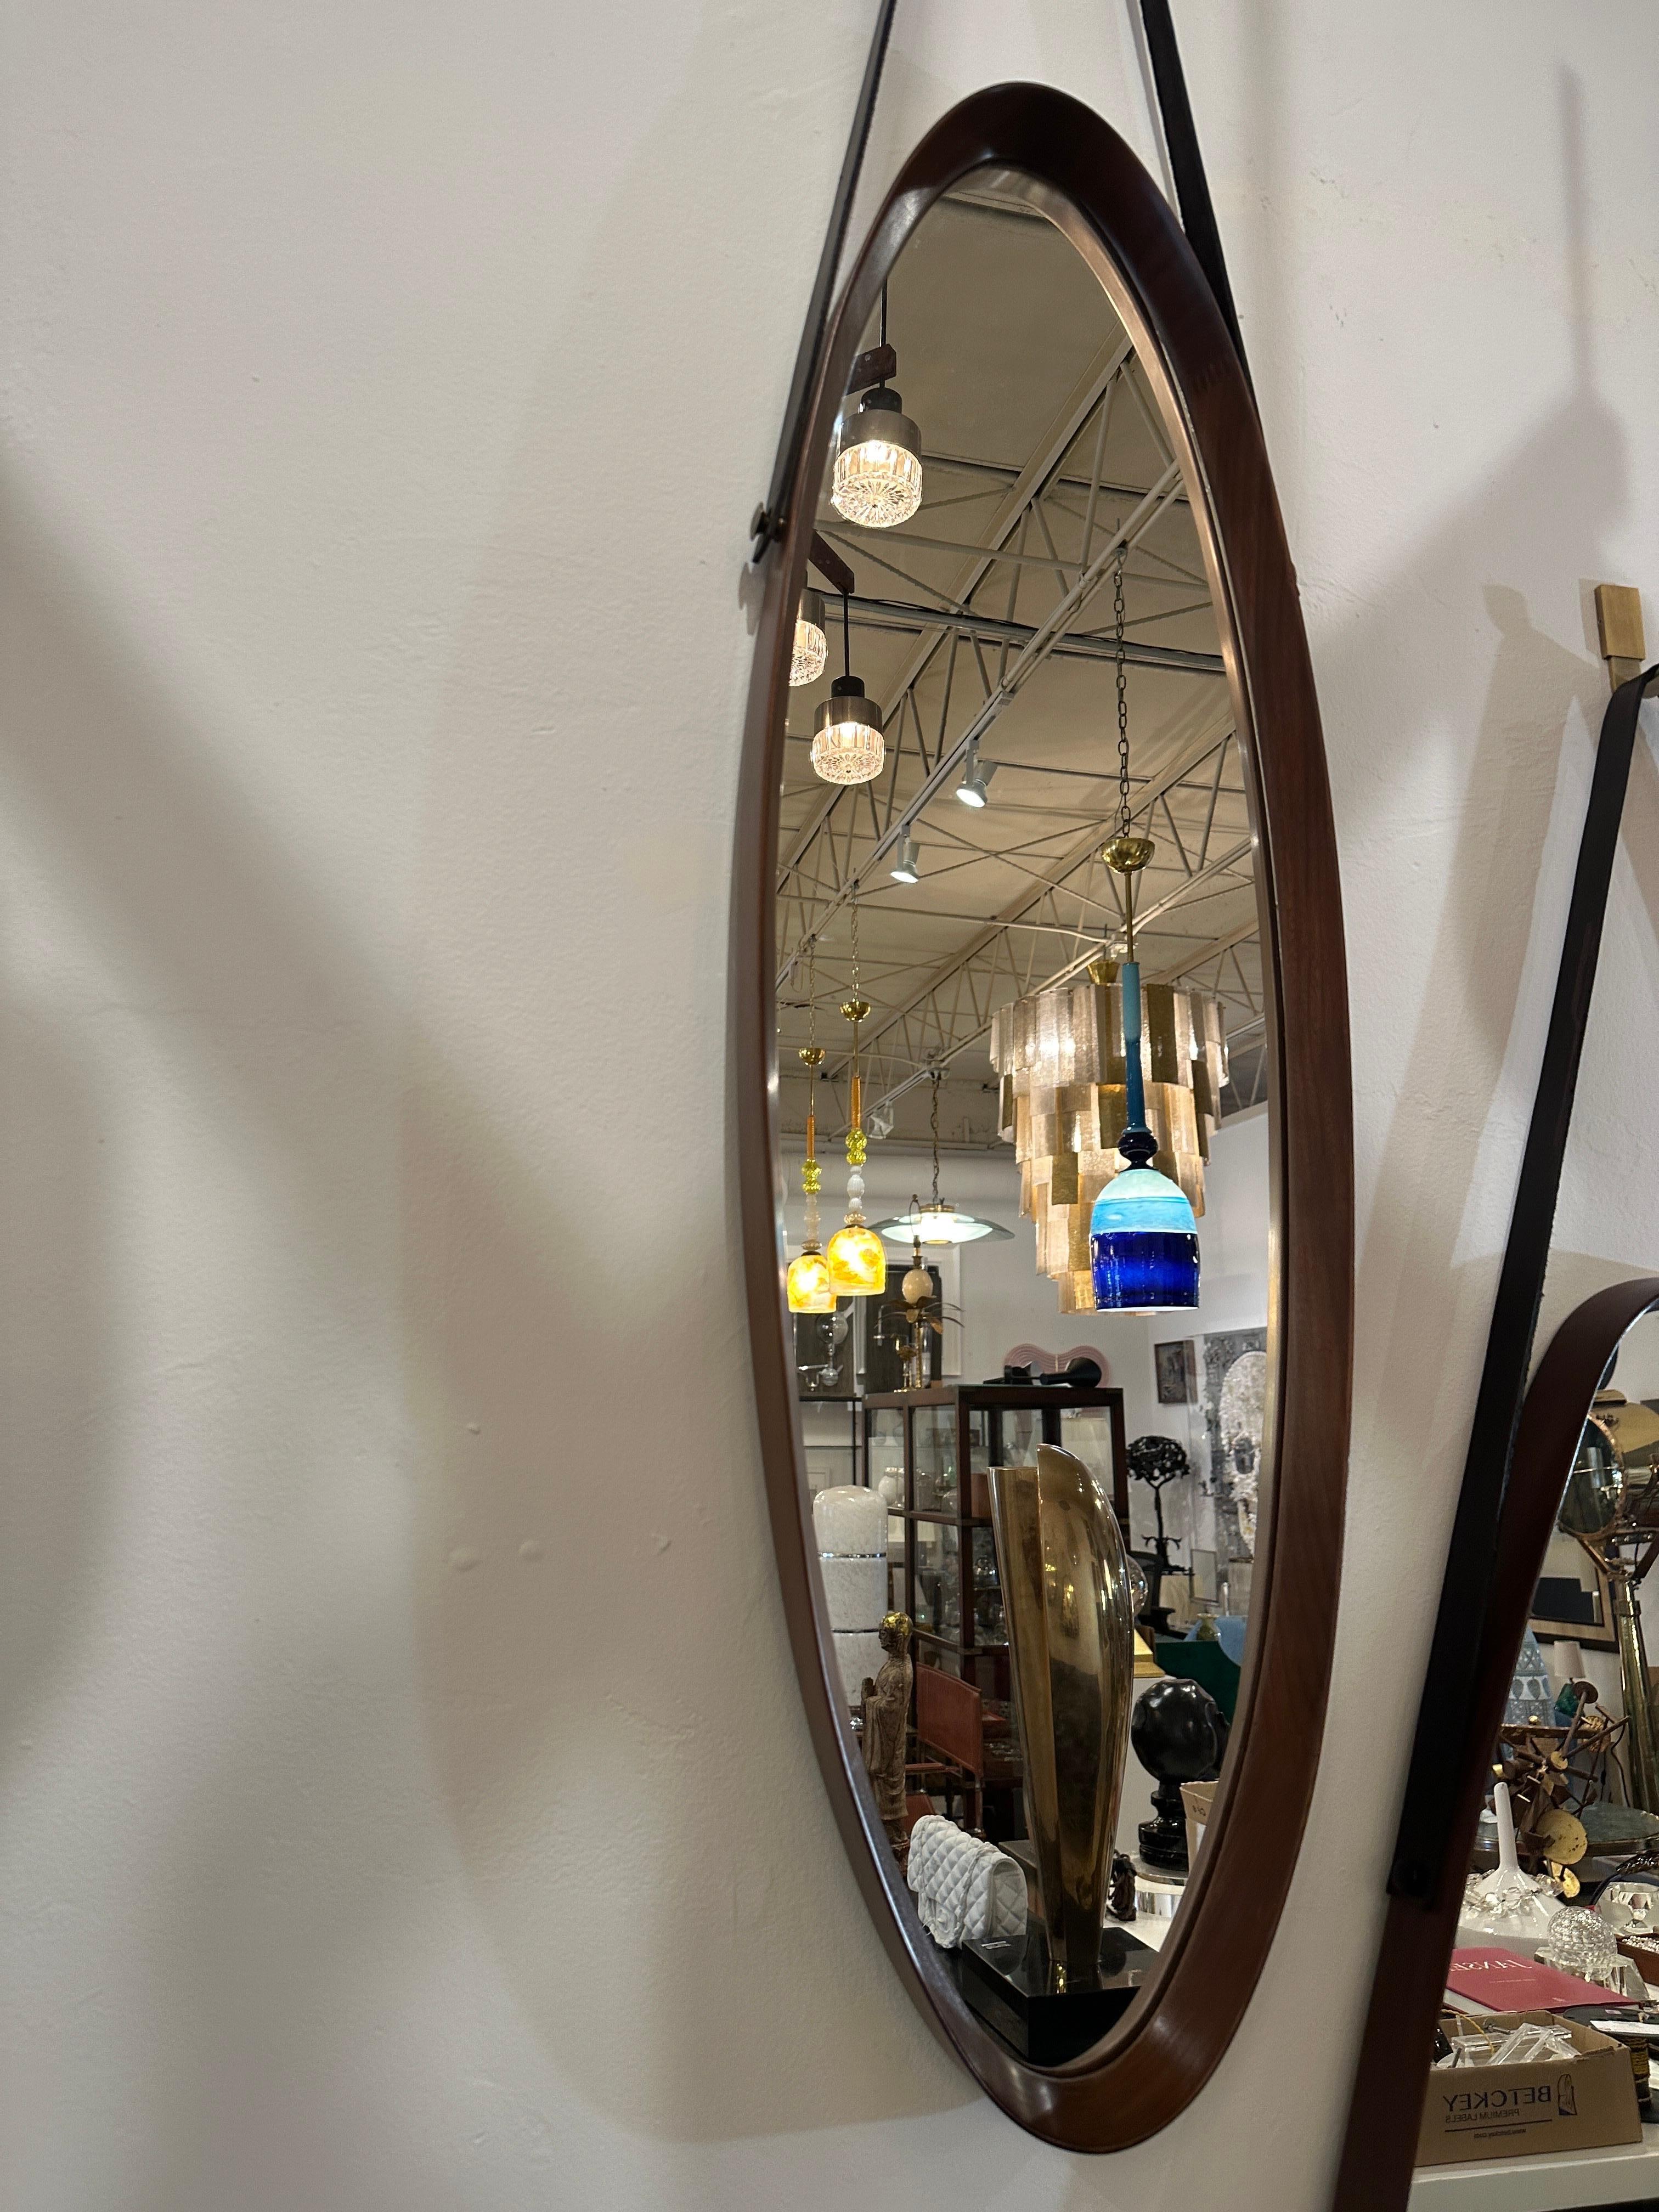 This wonderful Classic Italian midcentury walnut frame mirror in an oval design with a thick leather hanging strap and custom brass hook (included). This beauty is part of a group of THREE (3) that we acquired in our travels. They are sold